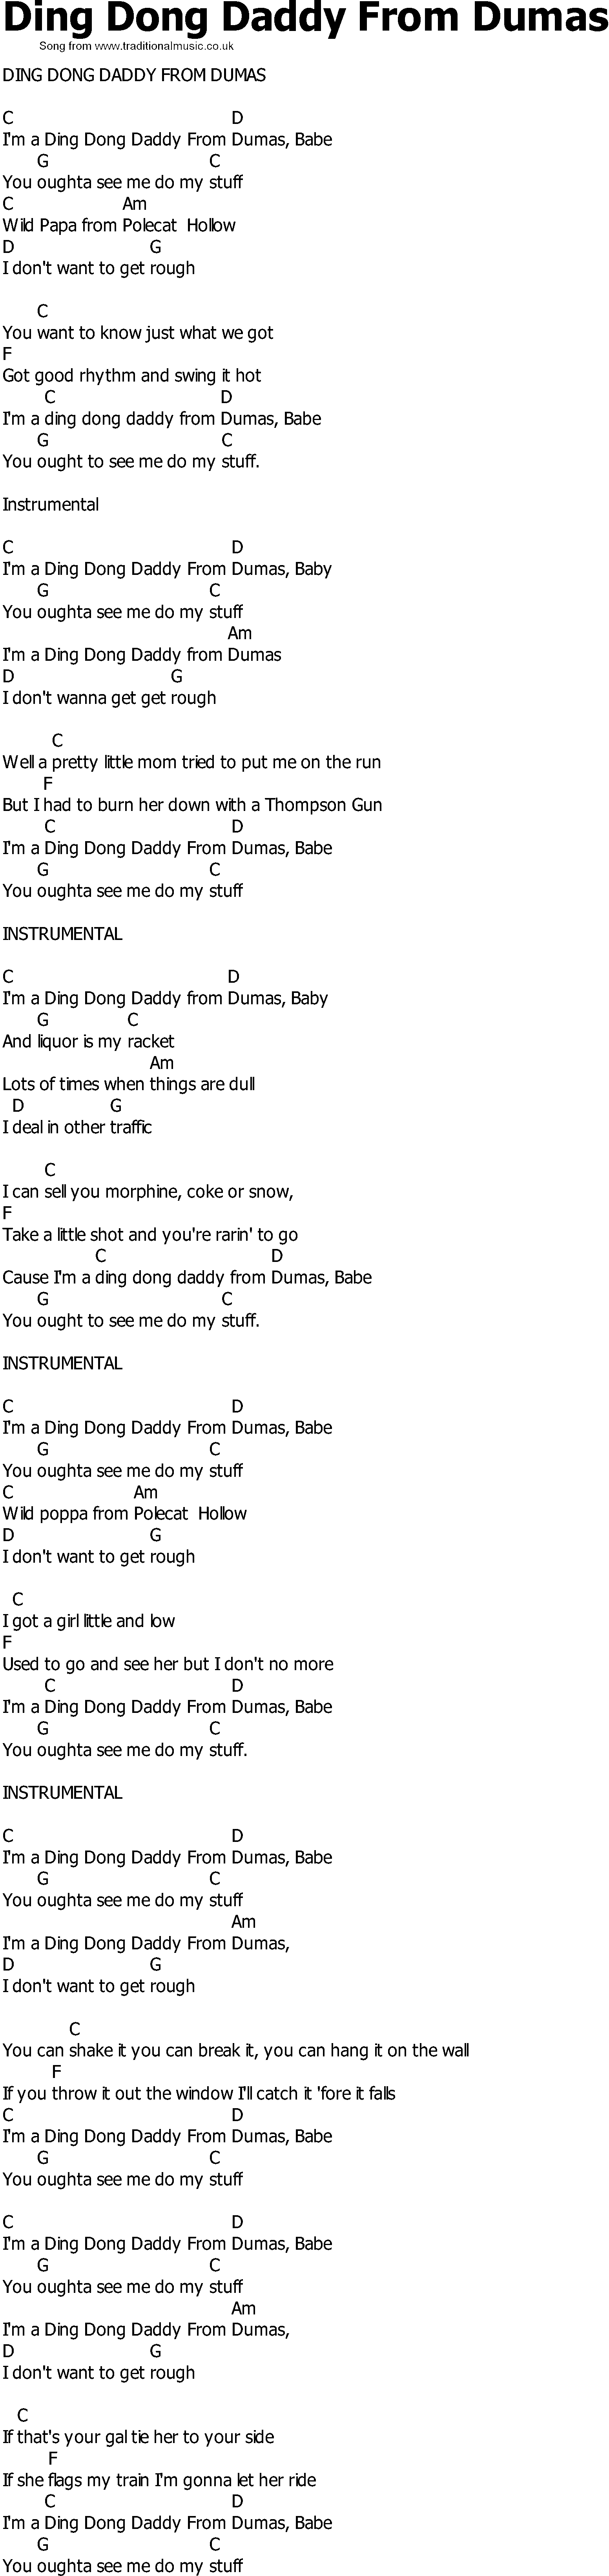 Old Country song lyrics with chords - Ding Dong Daddy From Dumas